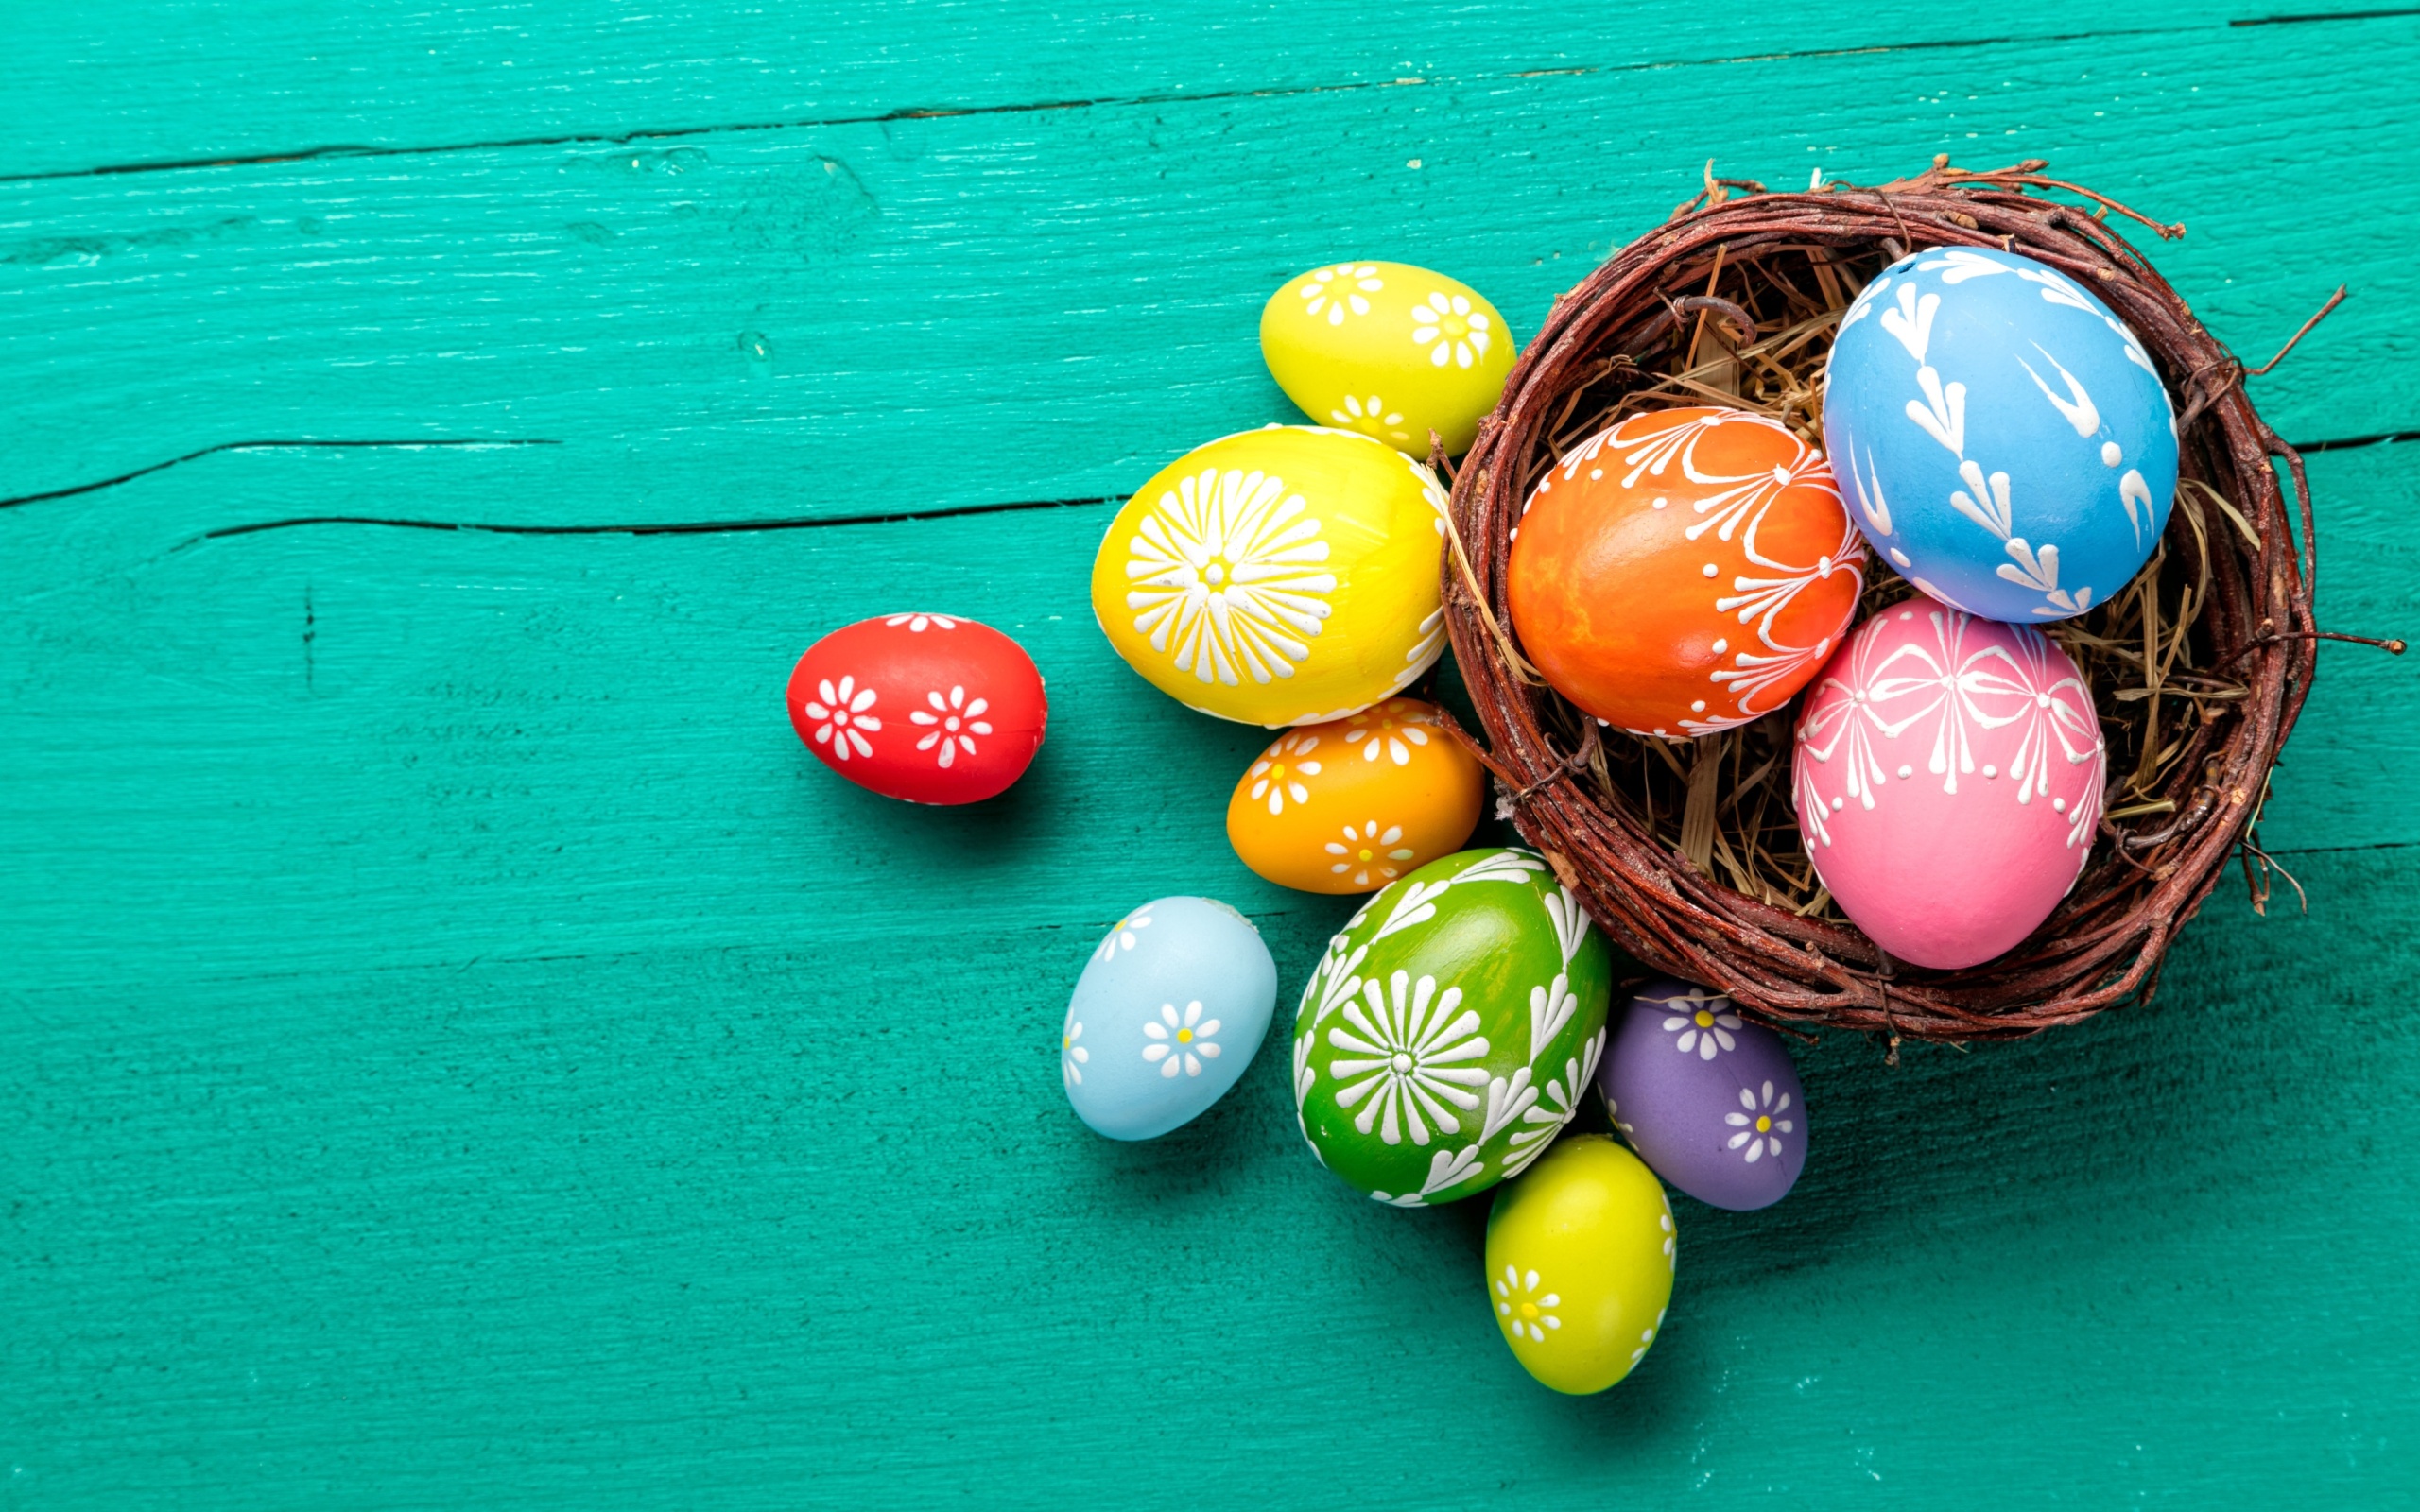 Dyed easter eggs wallpaper 2560x1600